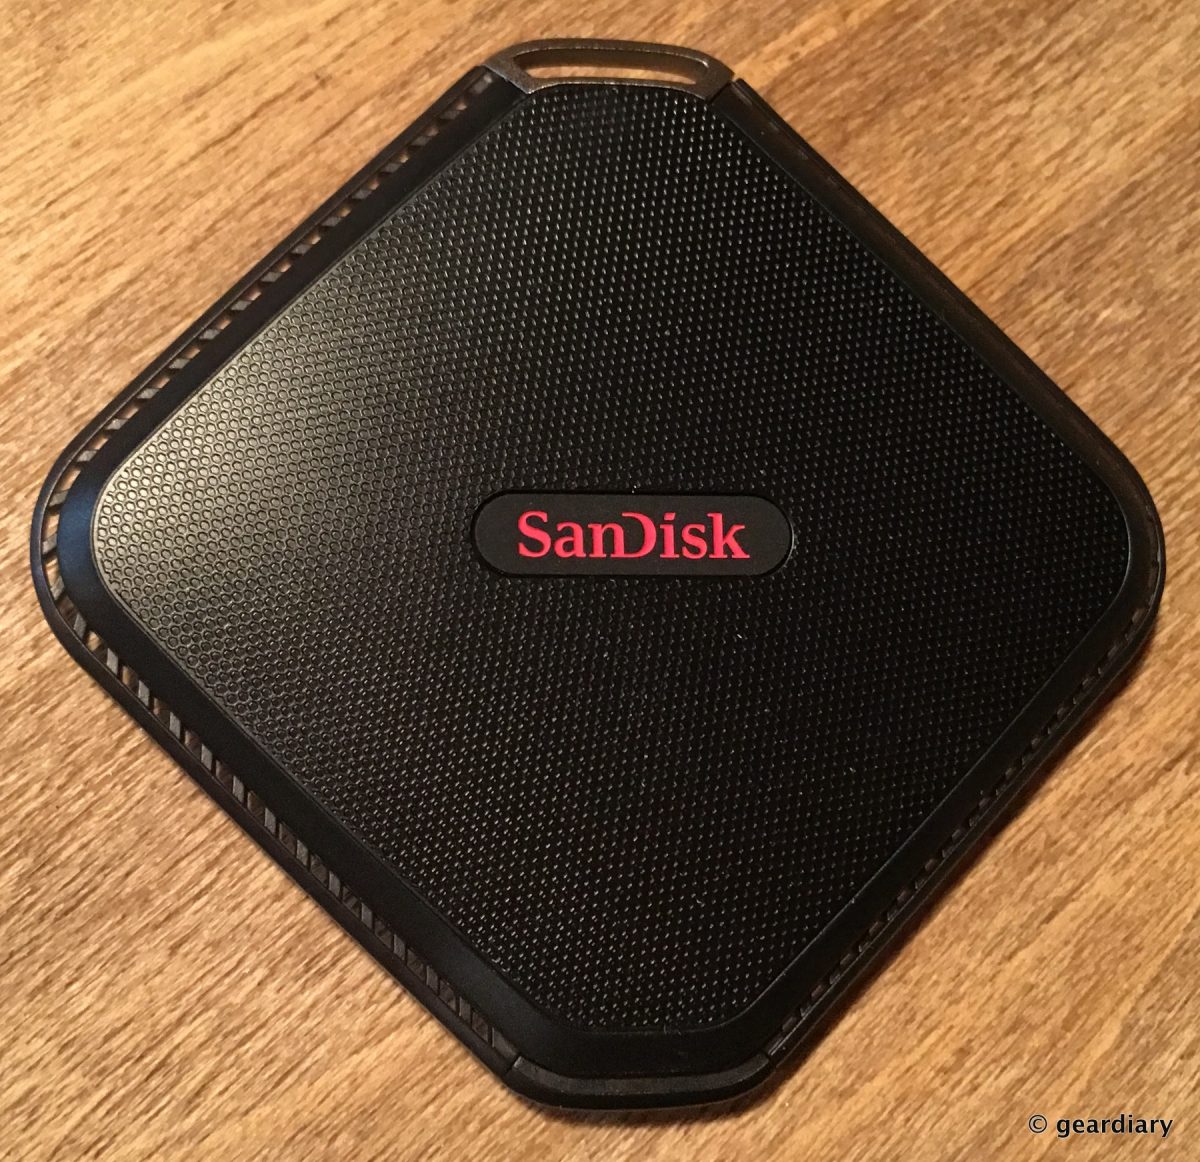 SanDisk Extreme 500 480GB Portable SSD Review: Small, Quiet, Durable, and Fast!